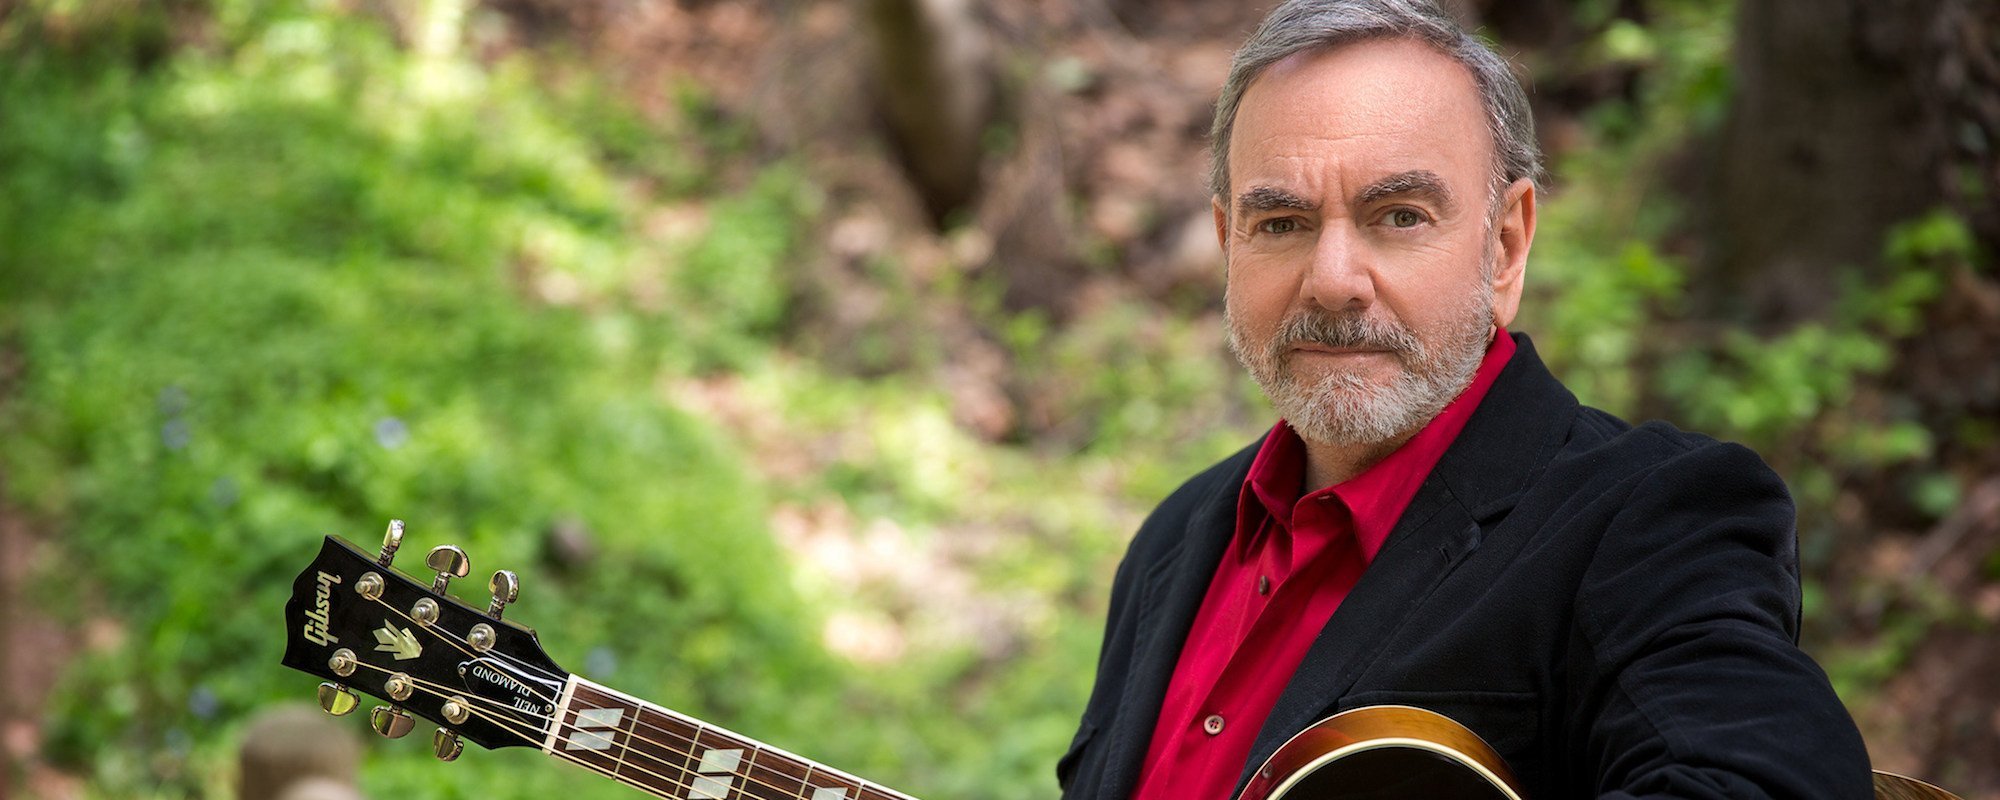 These famous songs were actually written by Neil Diamond